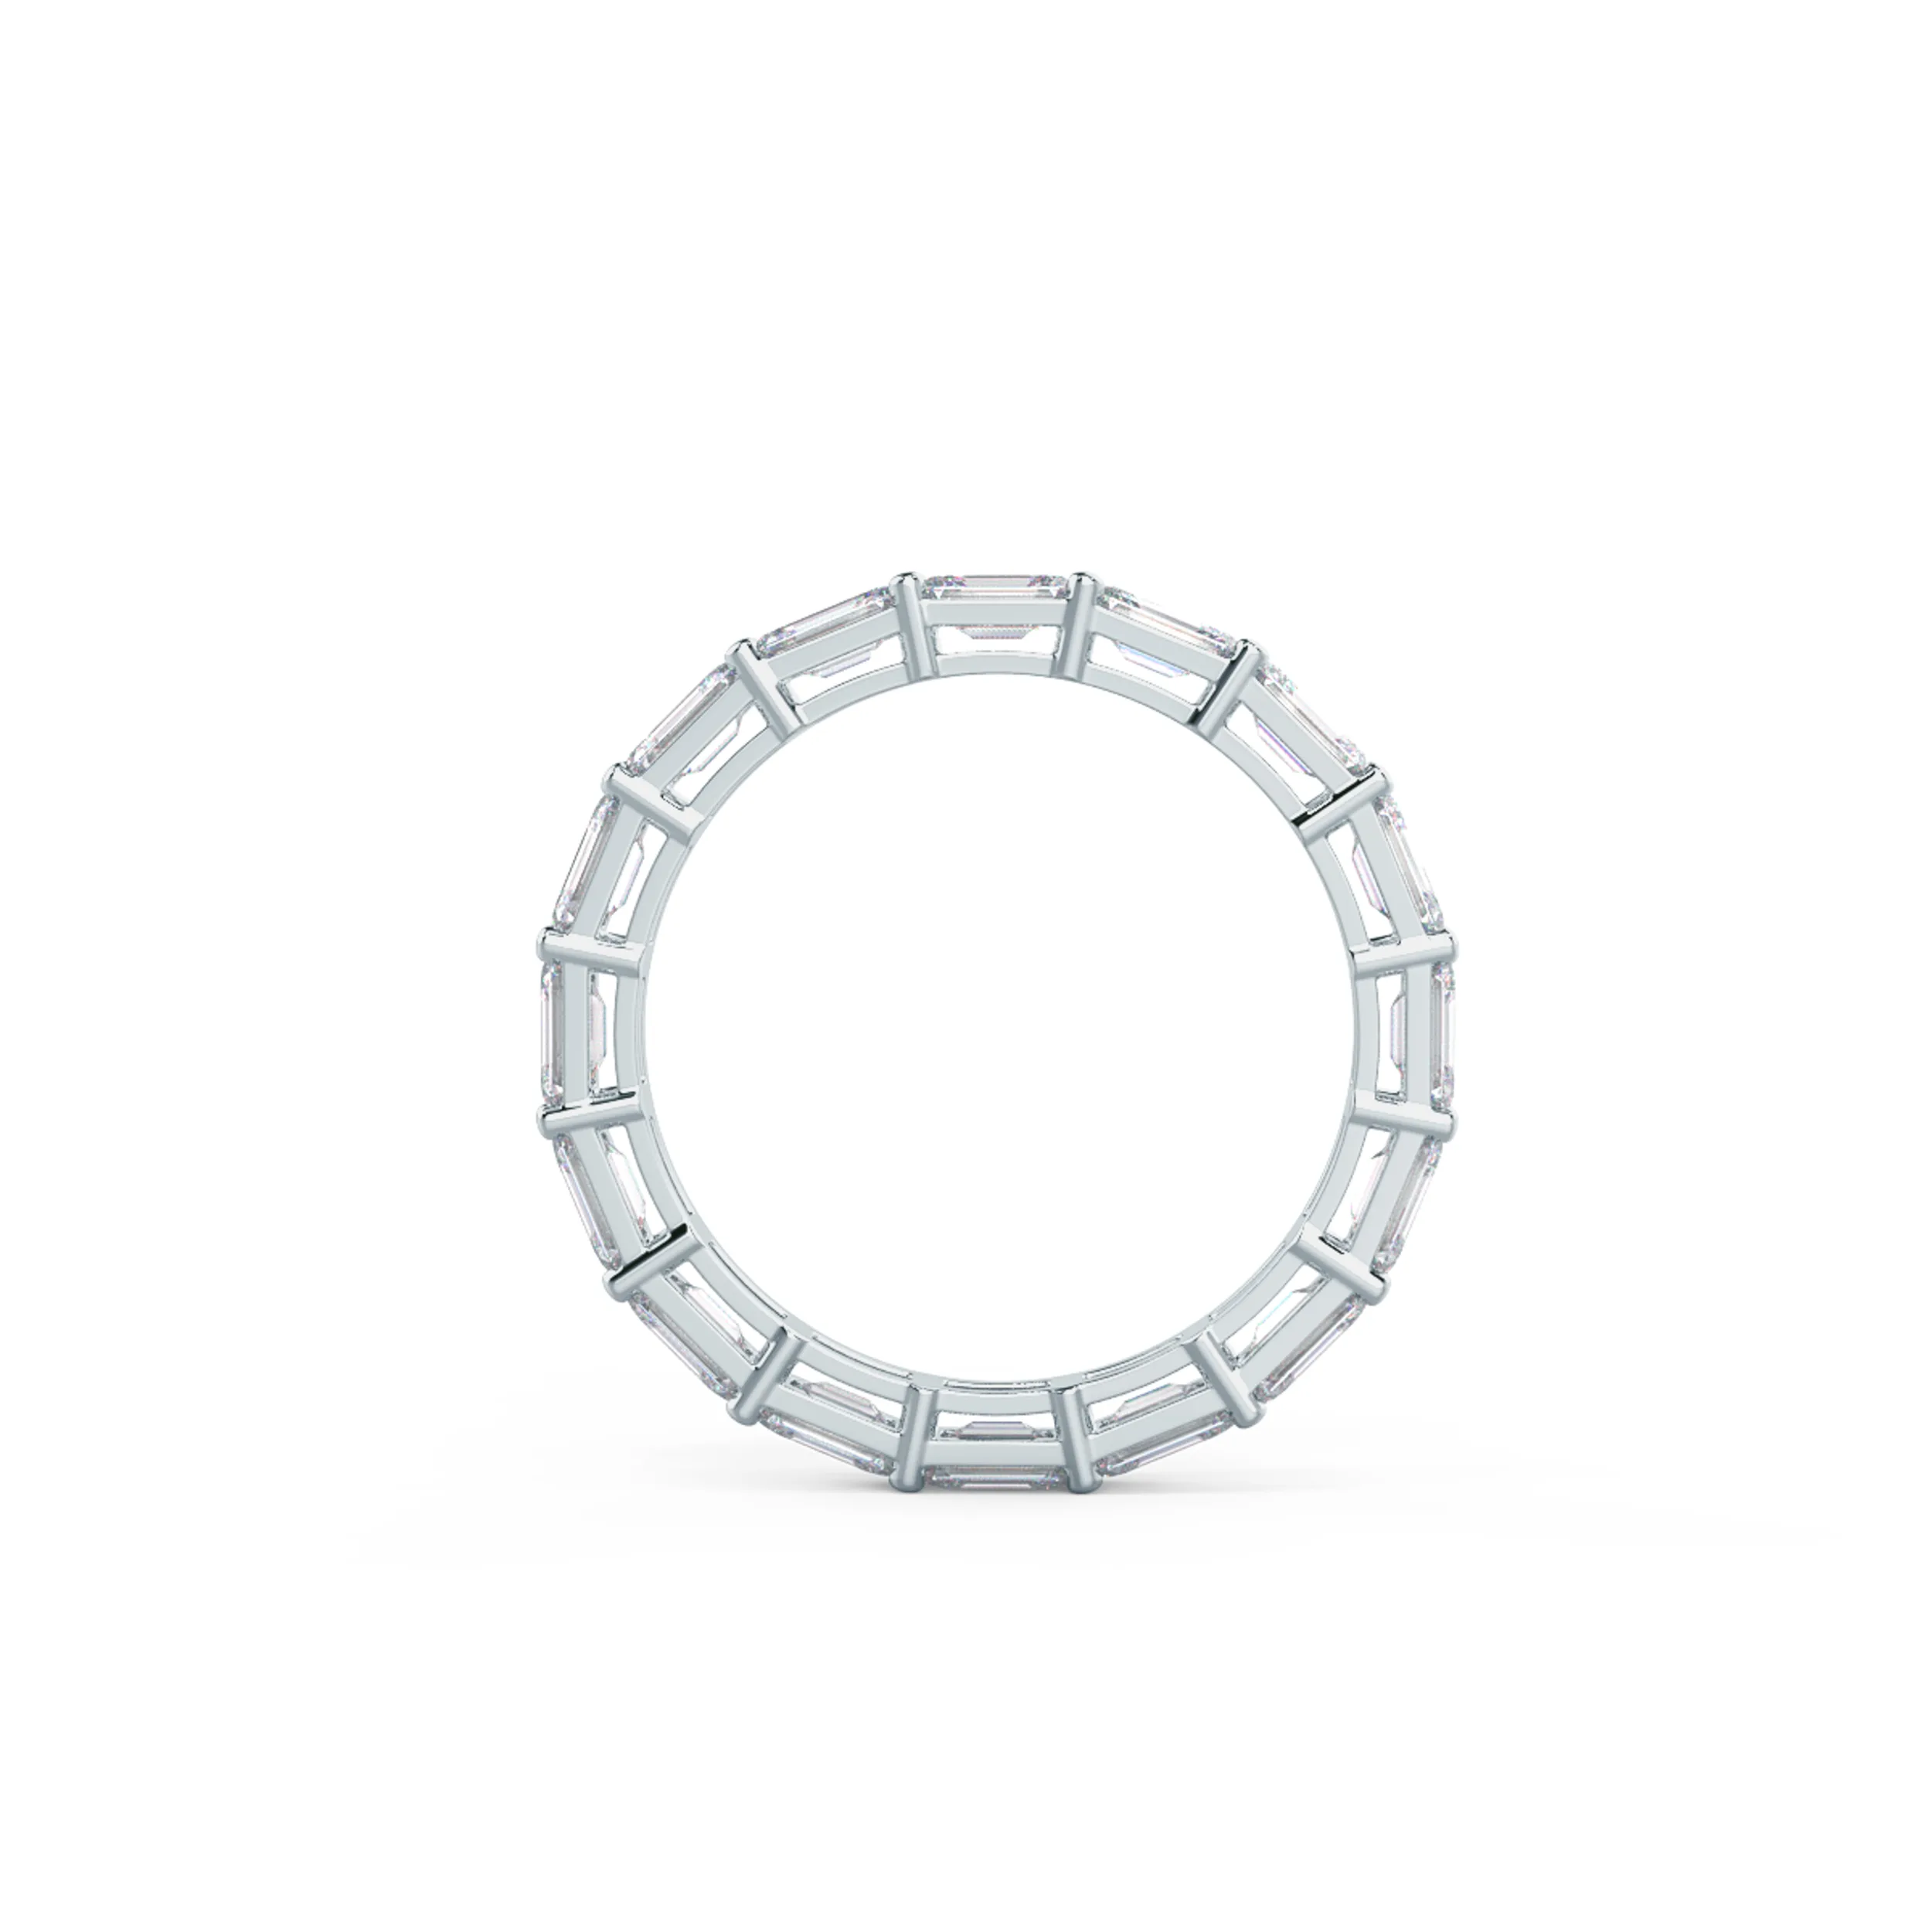 Exceptional Quality 3.0 ct Lab Grown Diamonds set in 18k White Gold Emerald East-West Eternity Band (Profile View)